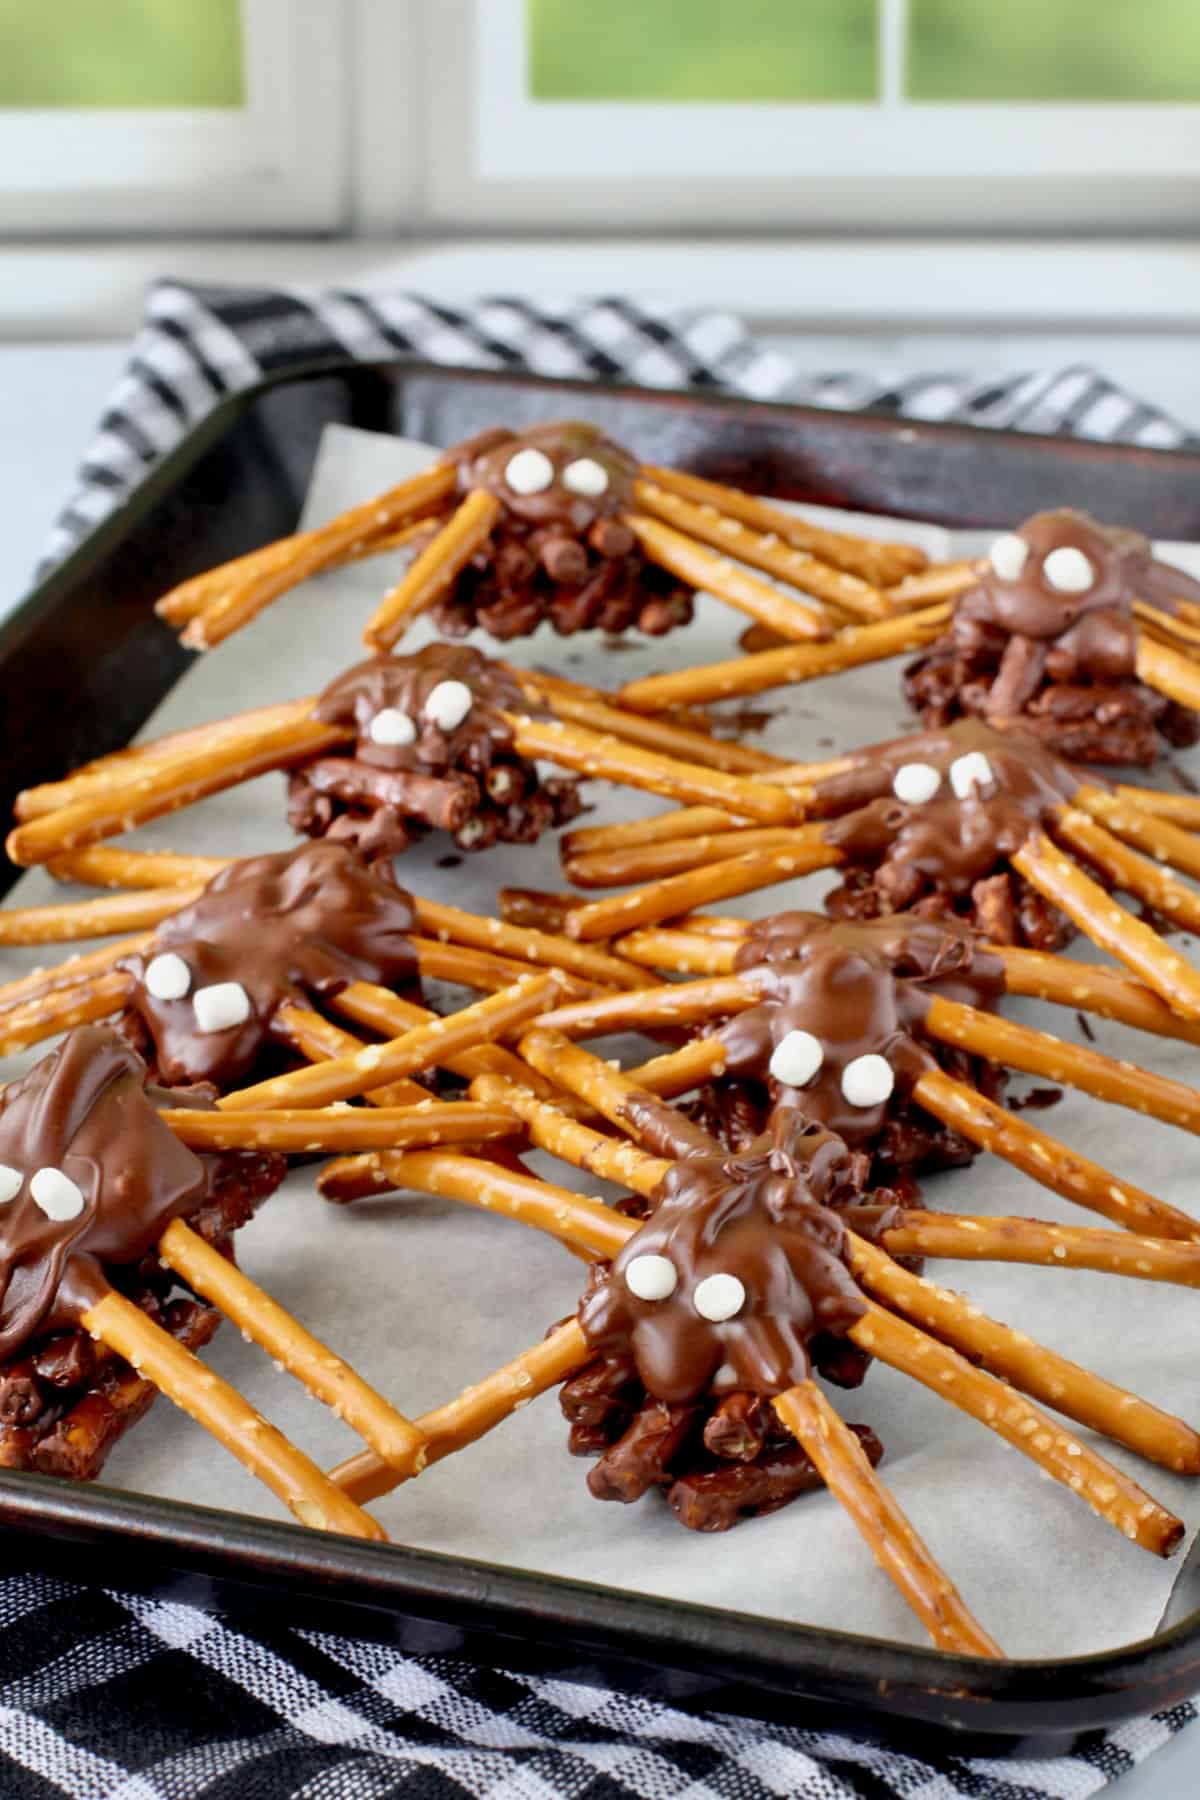 Chocolate Peanut Butter Spider Bites on a baking tray.